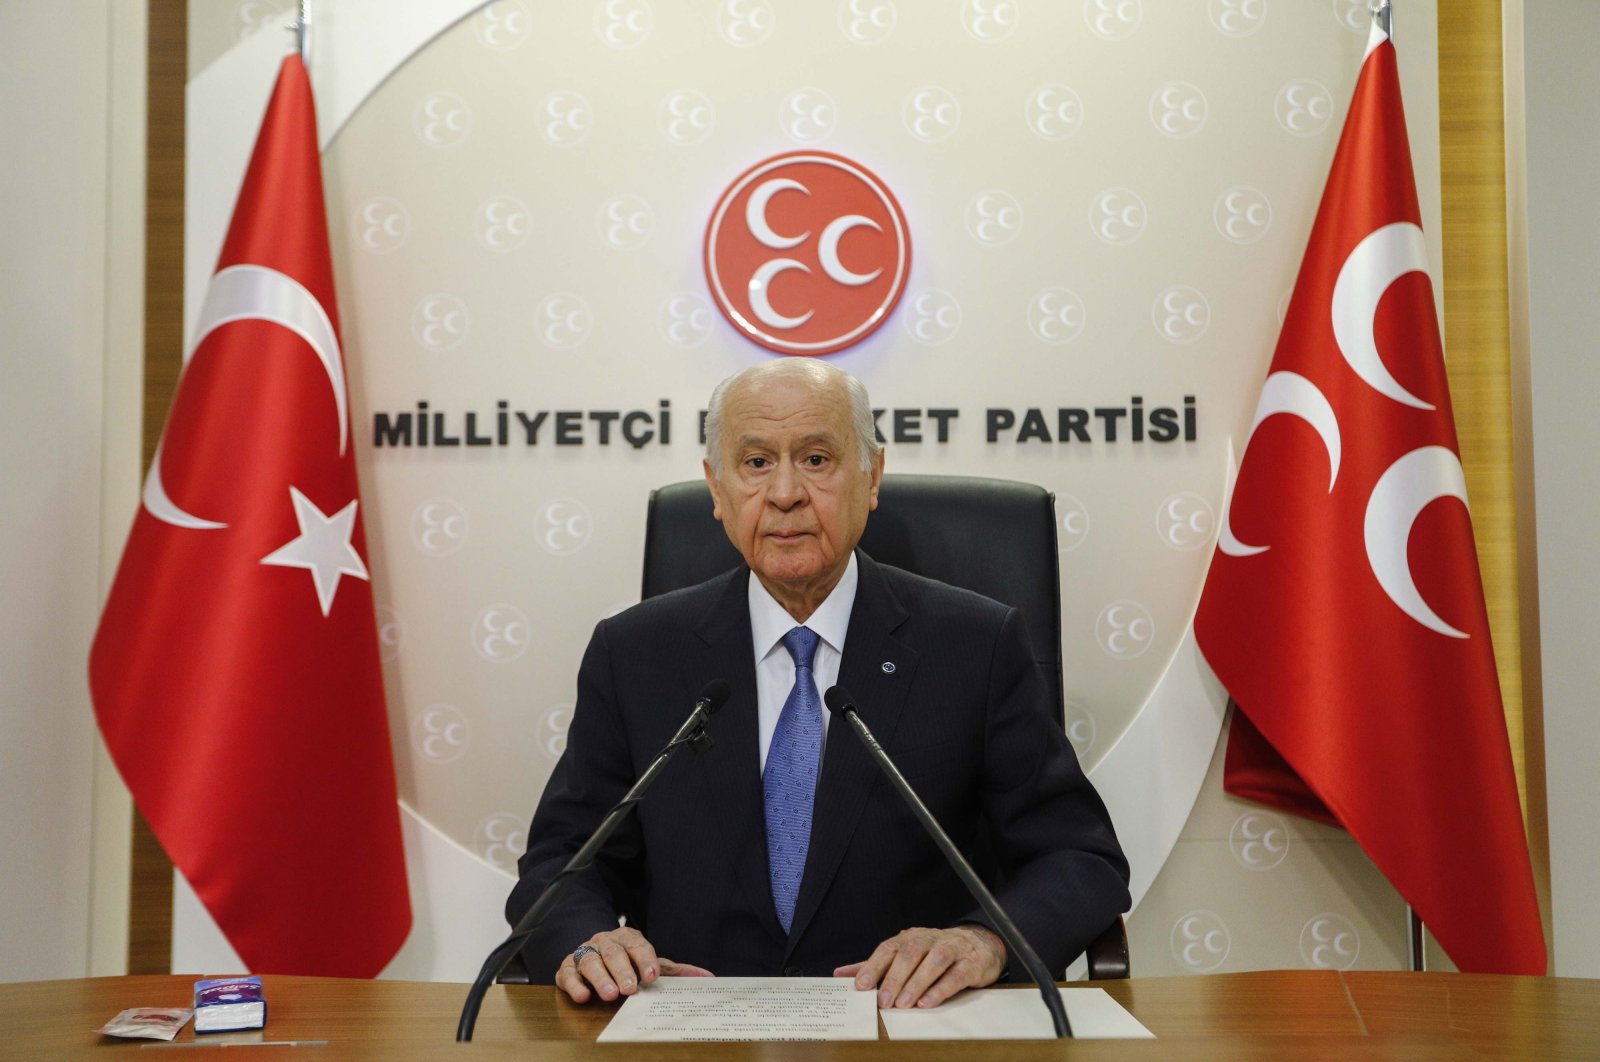 Nationalist Movement Party Chairperson Devlet Bahçeli speaks to reporters at a news conference at the party's headquarters in the capital Ankara, Turkey, Jan. 13, 2020. (DHA Photo)